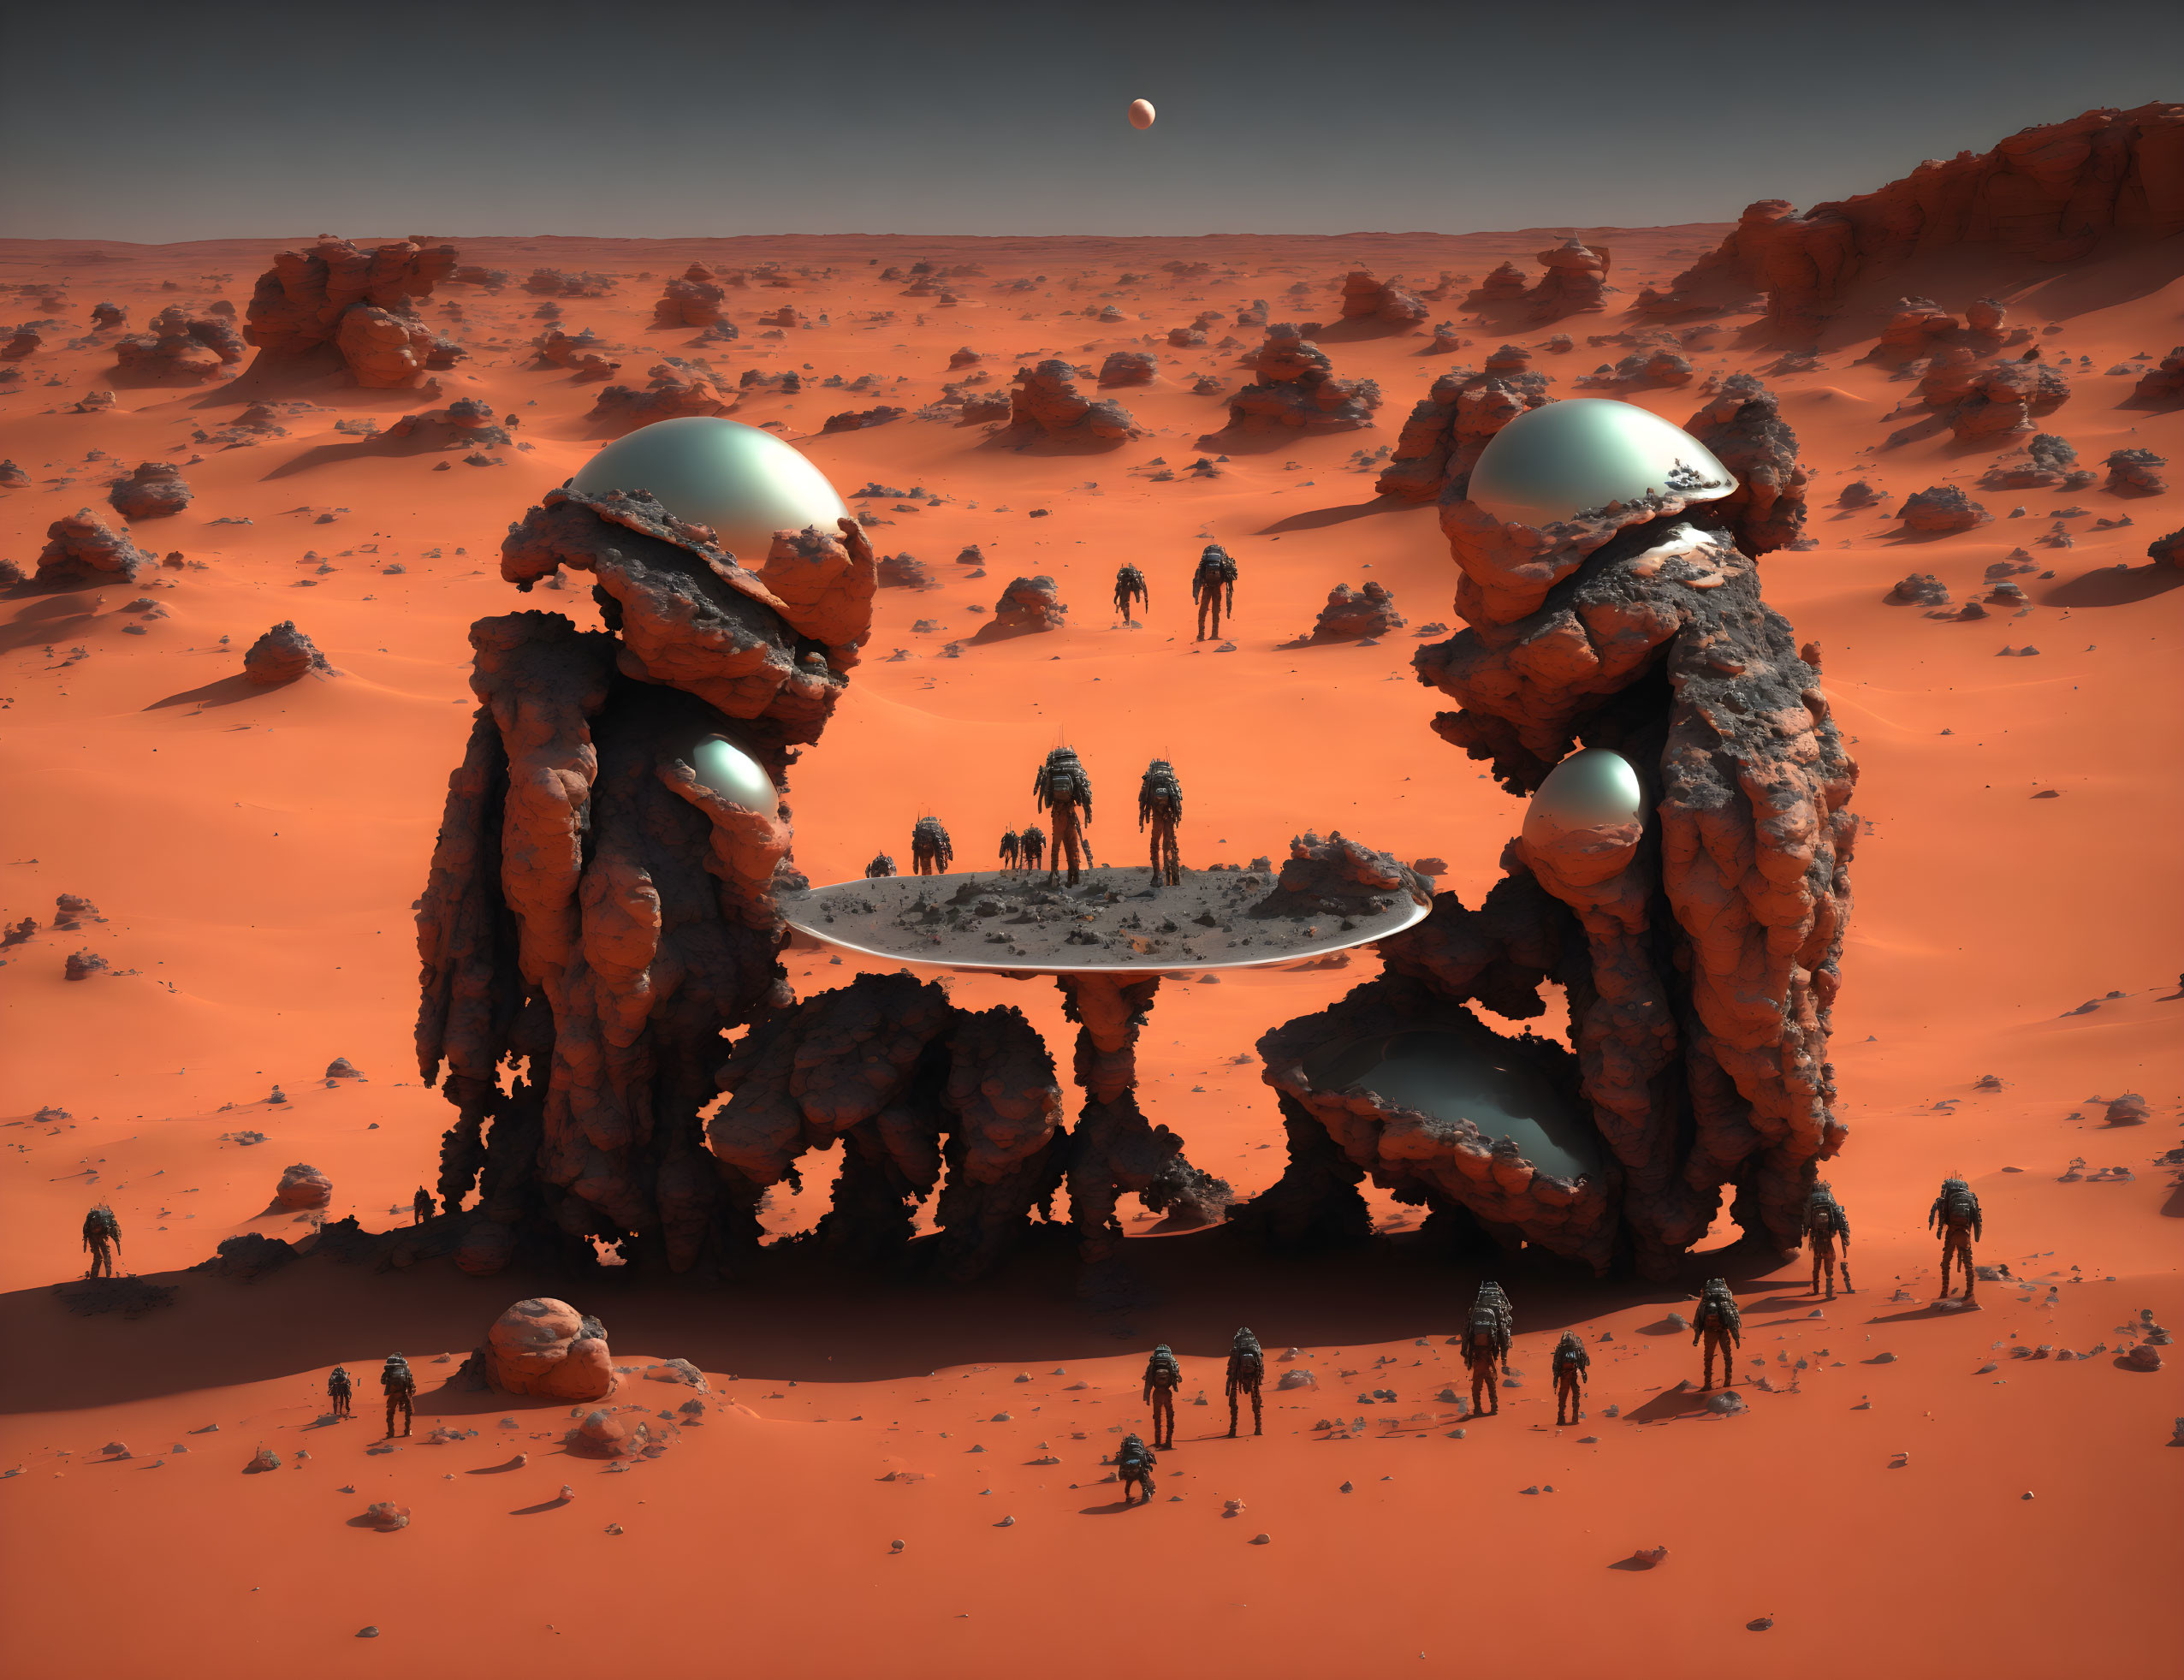 Aliens play competitive game on planet Mars